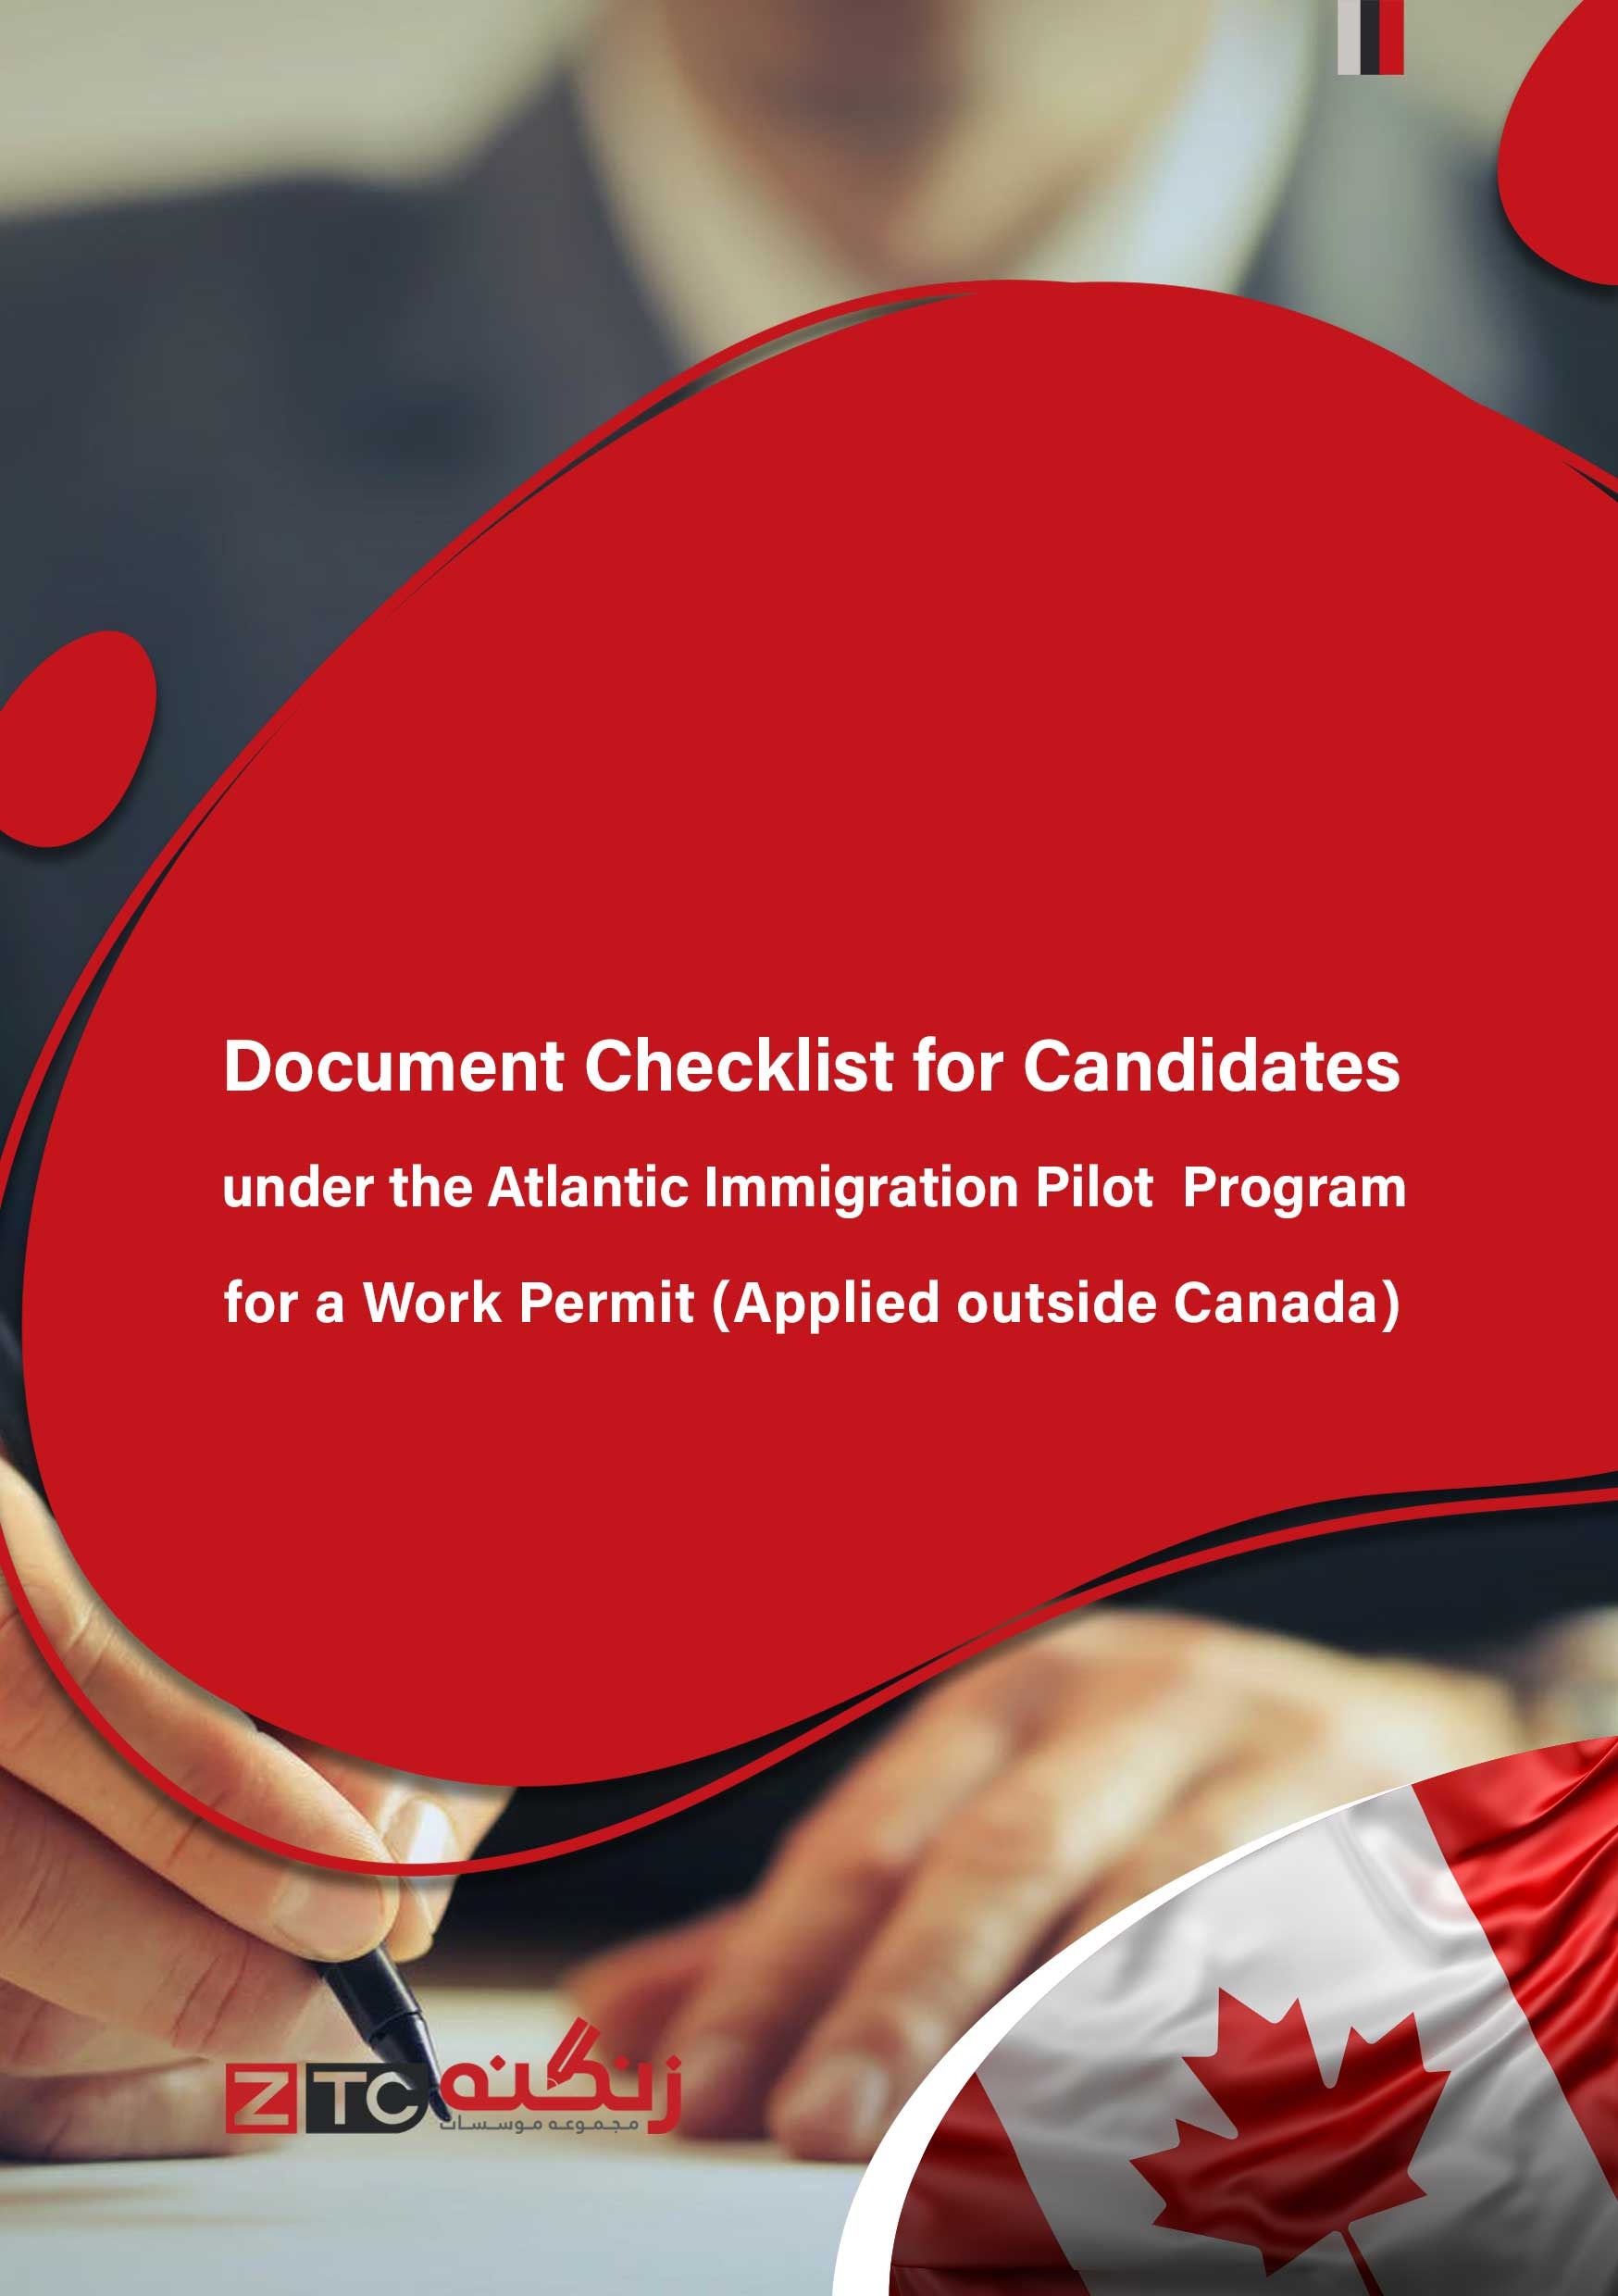 Document Checklist for Candidates under the Atlantic Immigration Pilot Program for a Work Permit (Applied outside Canada)